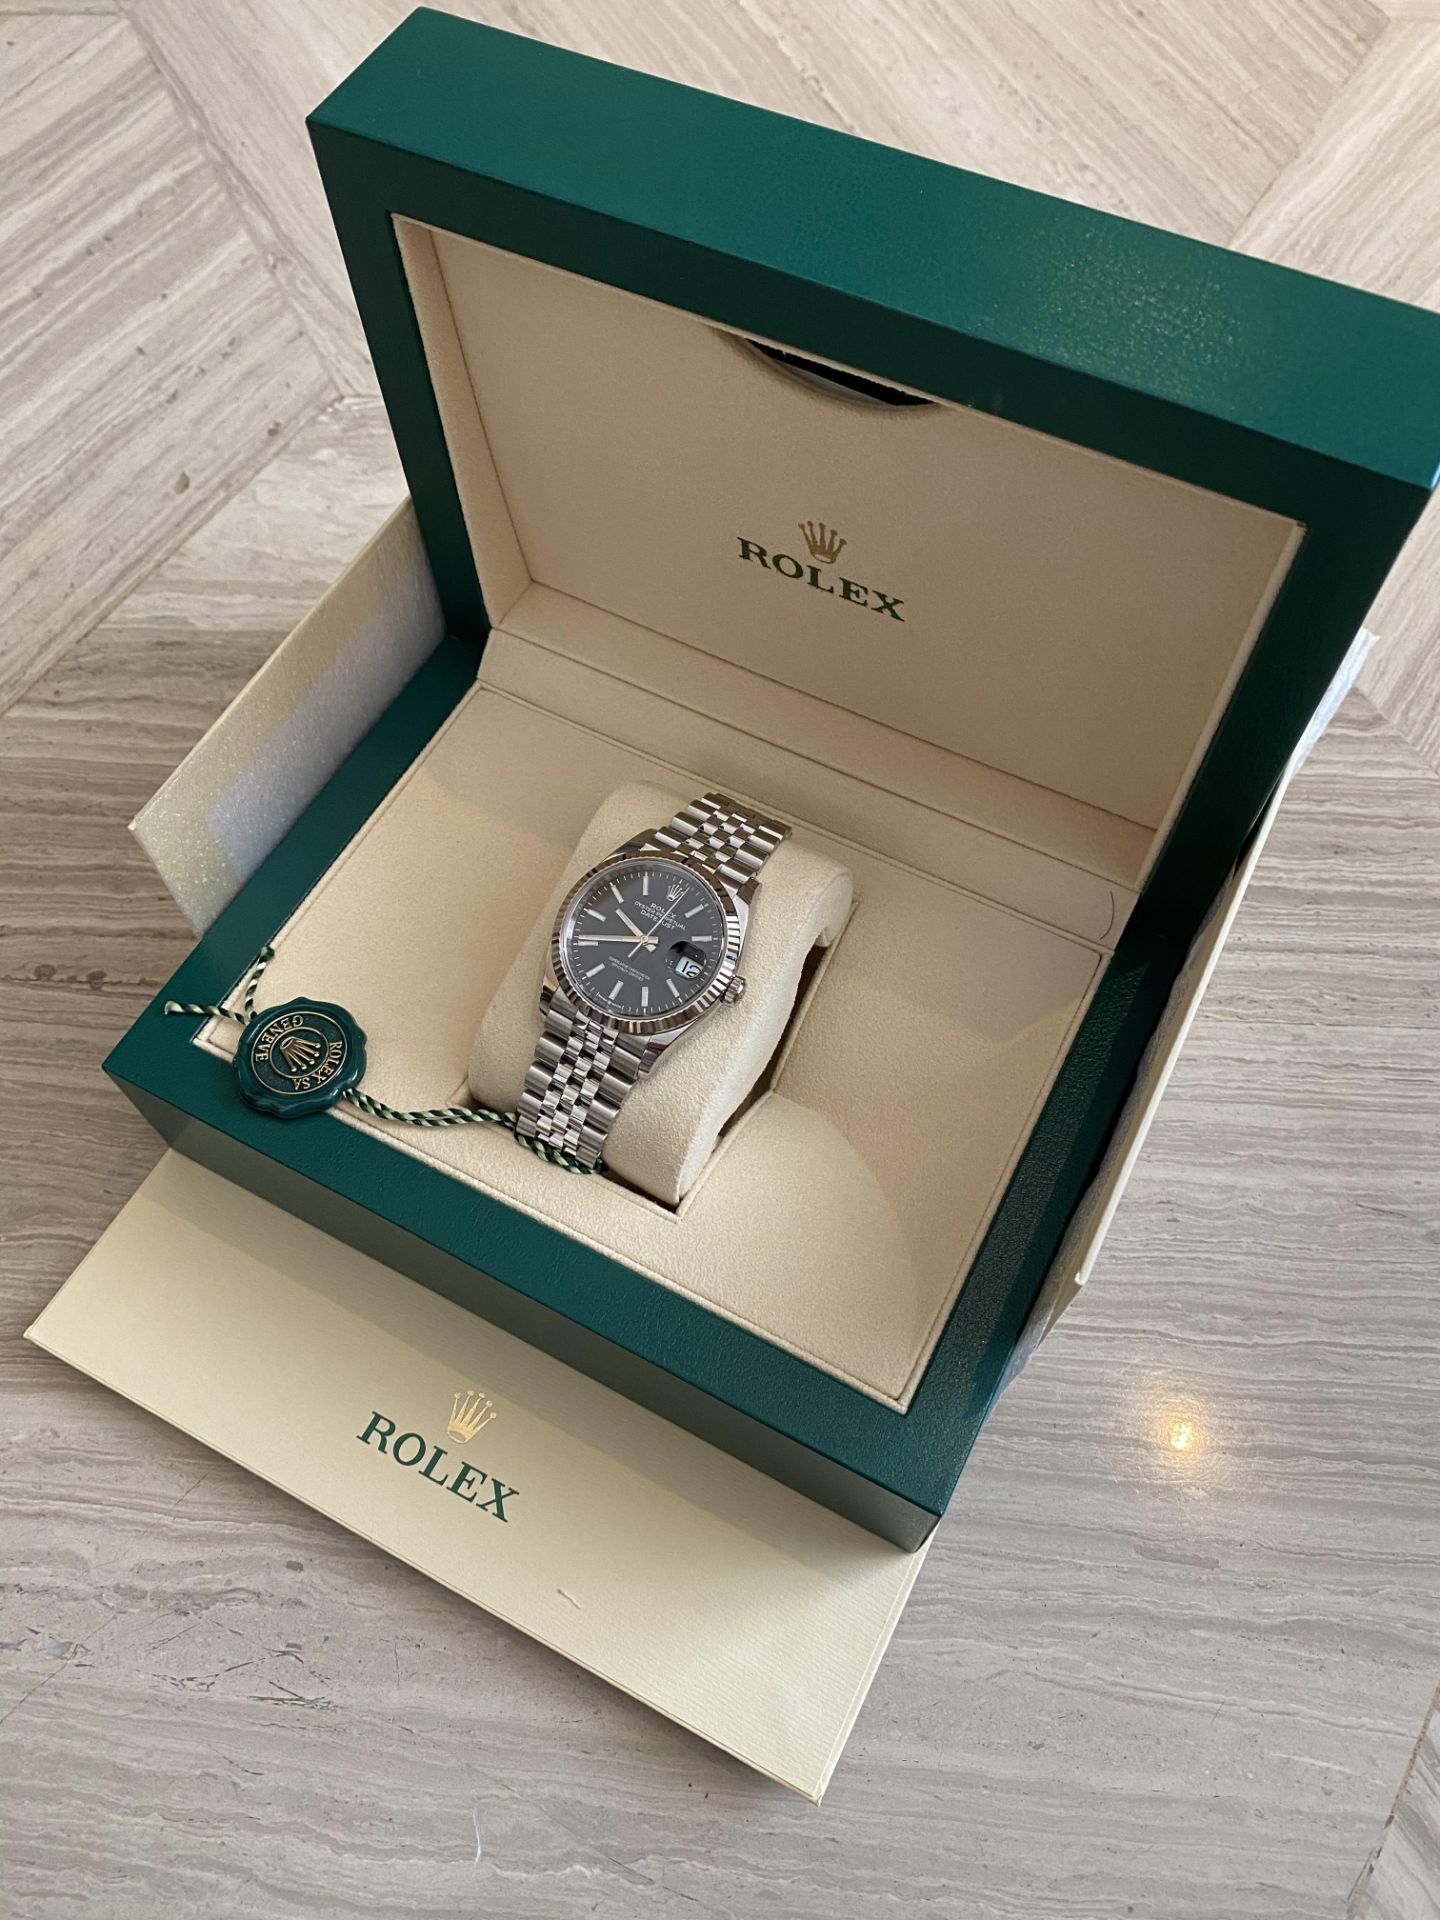 2020 ROLEX DATEJUST 36 OYSTERSTEEL 36MM AND WHITE GOLD - Image 4 of 10